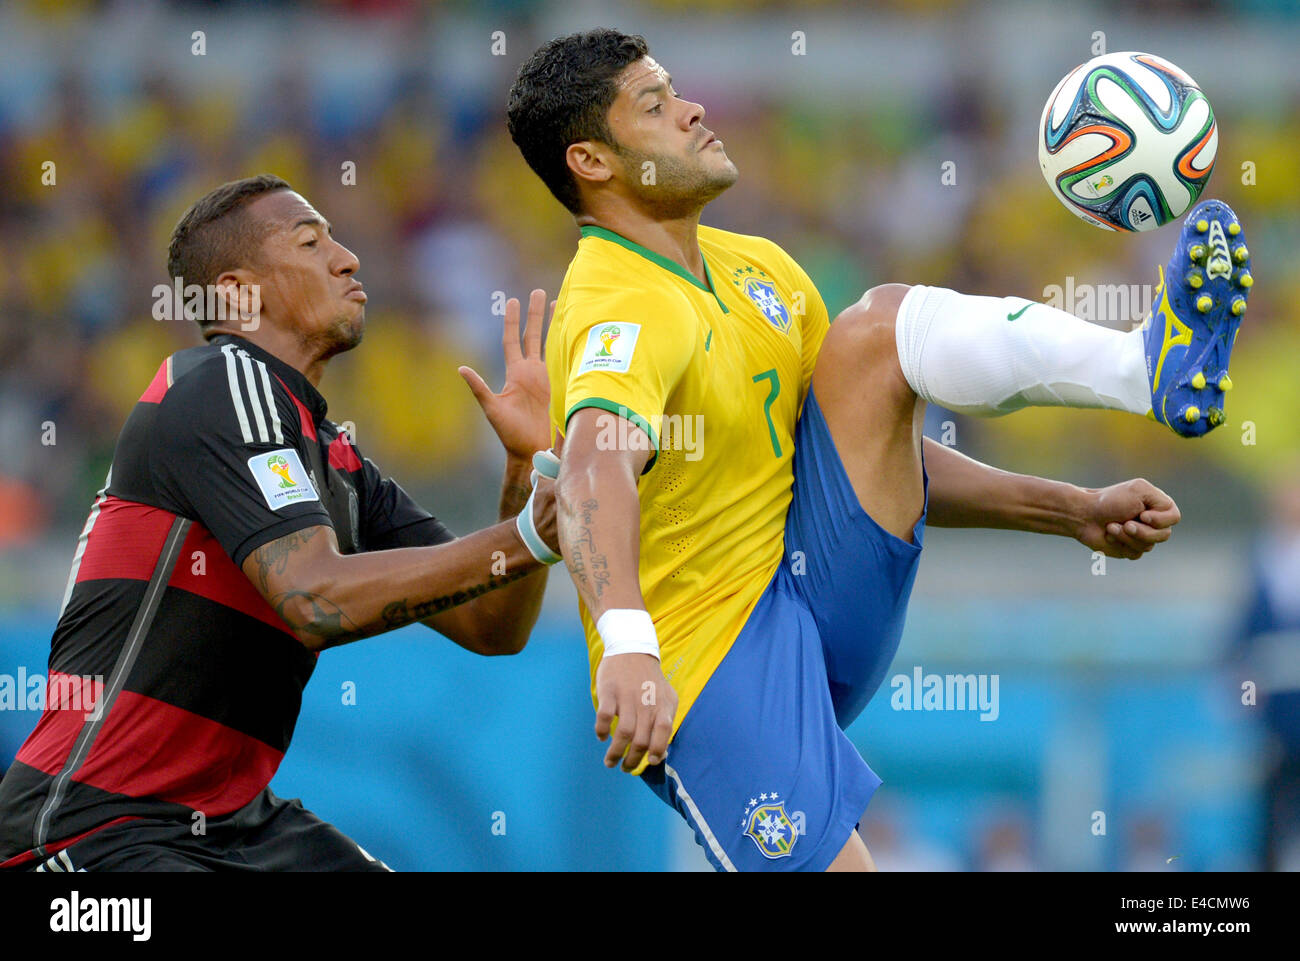 Belo Horizonte, Brazil. 08th July, 2014. Germany's Jerome Boateng (L) and Brazil's Hulk vie for the ball during the FIFA World Cup 2014 semi-final soccer match between Brazil and Germany at Estadio Mineirao in Belo Horizonte, Brazil, 08 July 2014. Photo: Thomas Eisenhuth/dpa/Alamy Live News Stock Photo